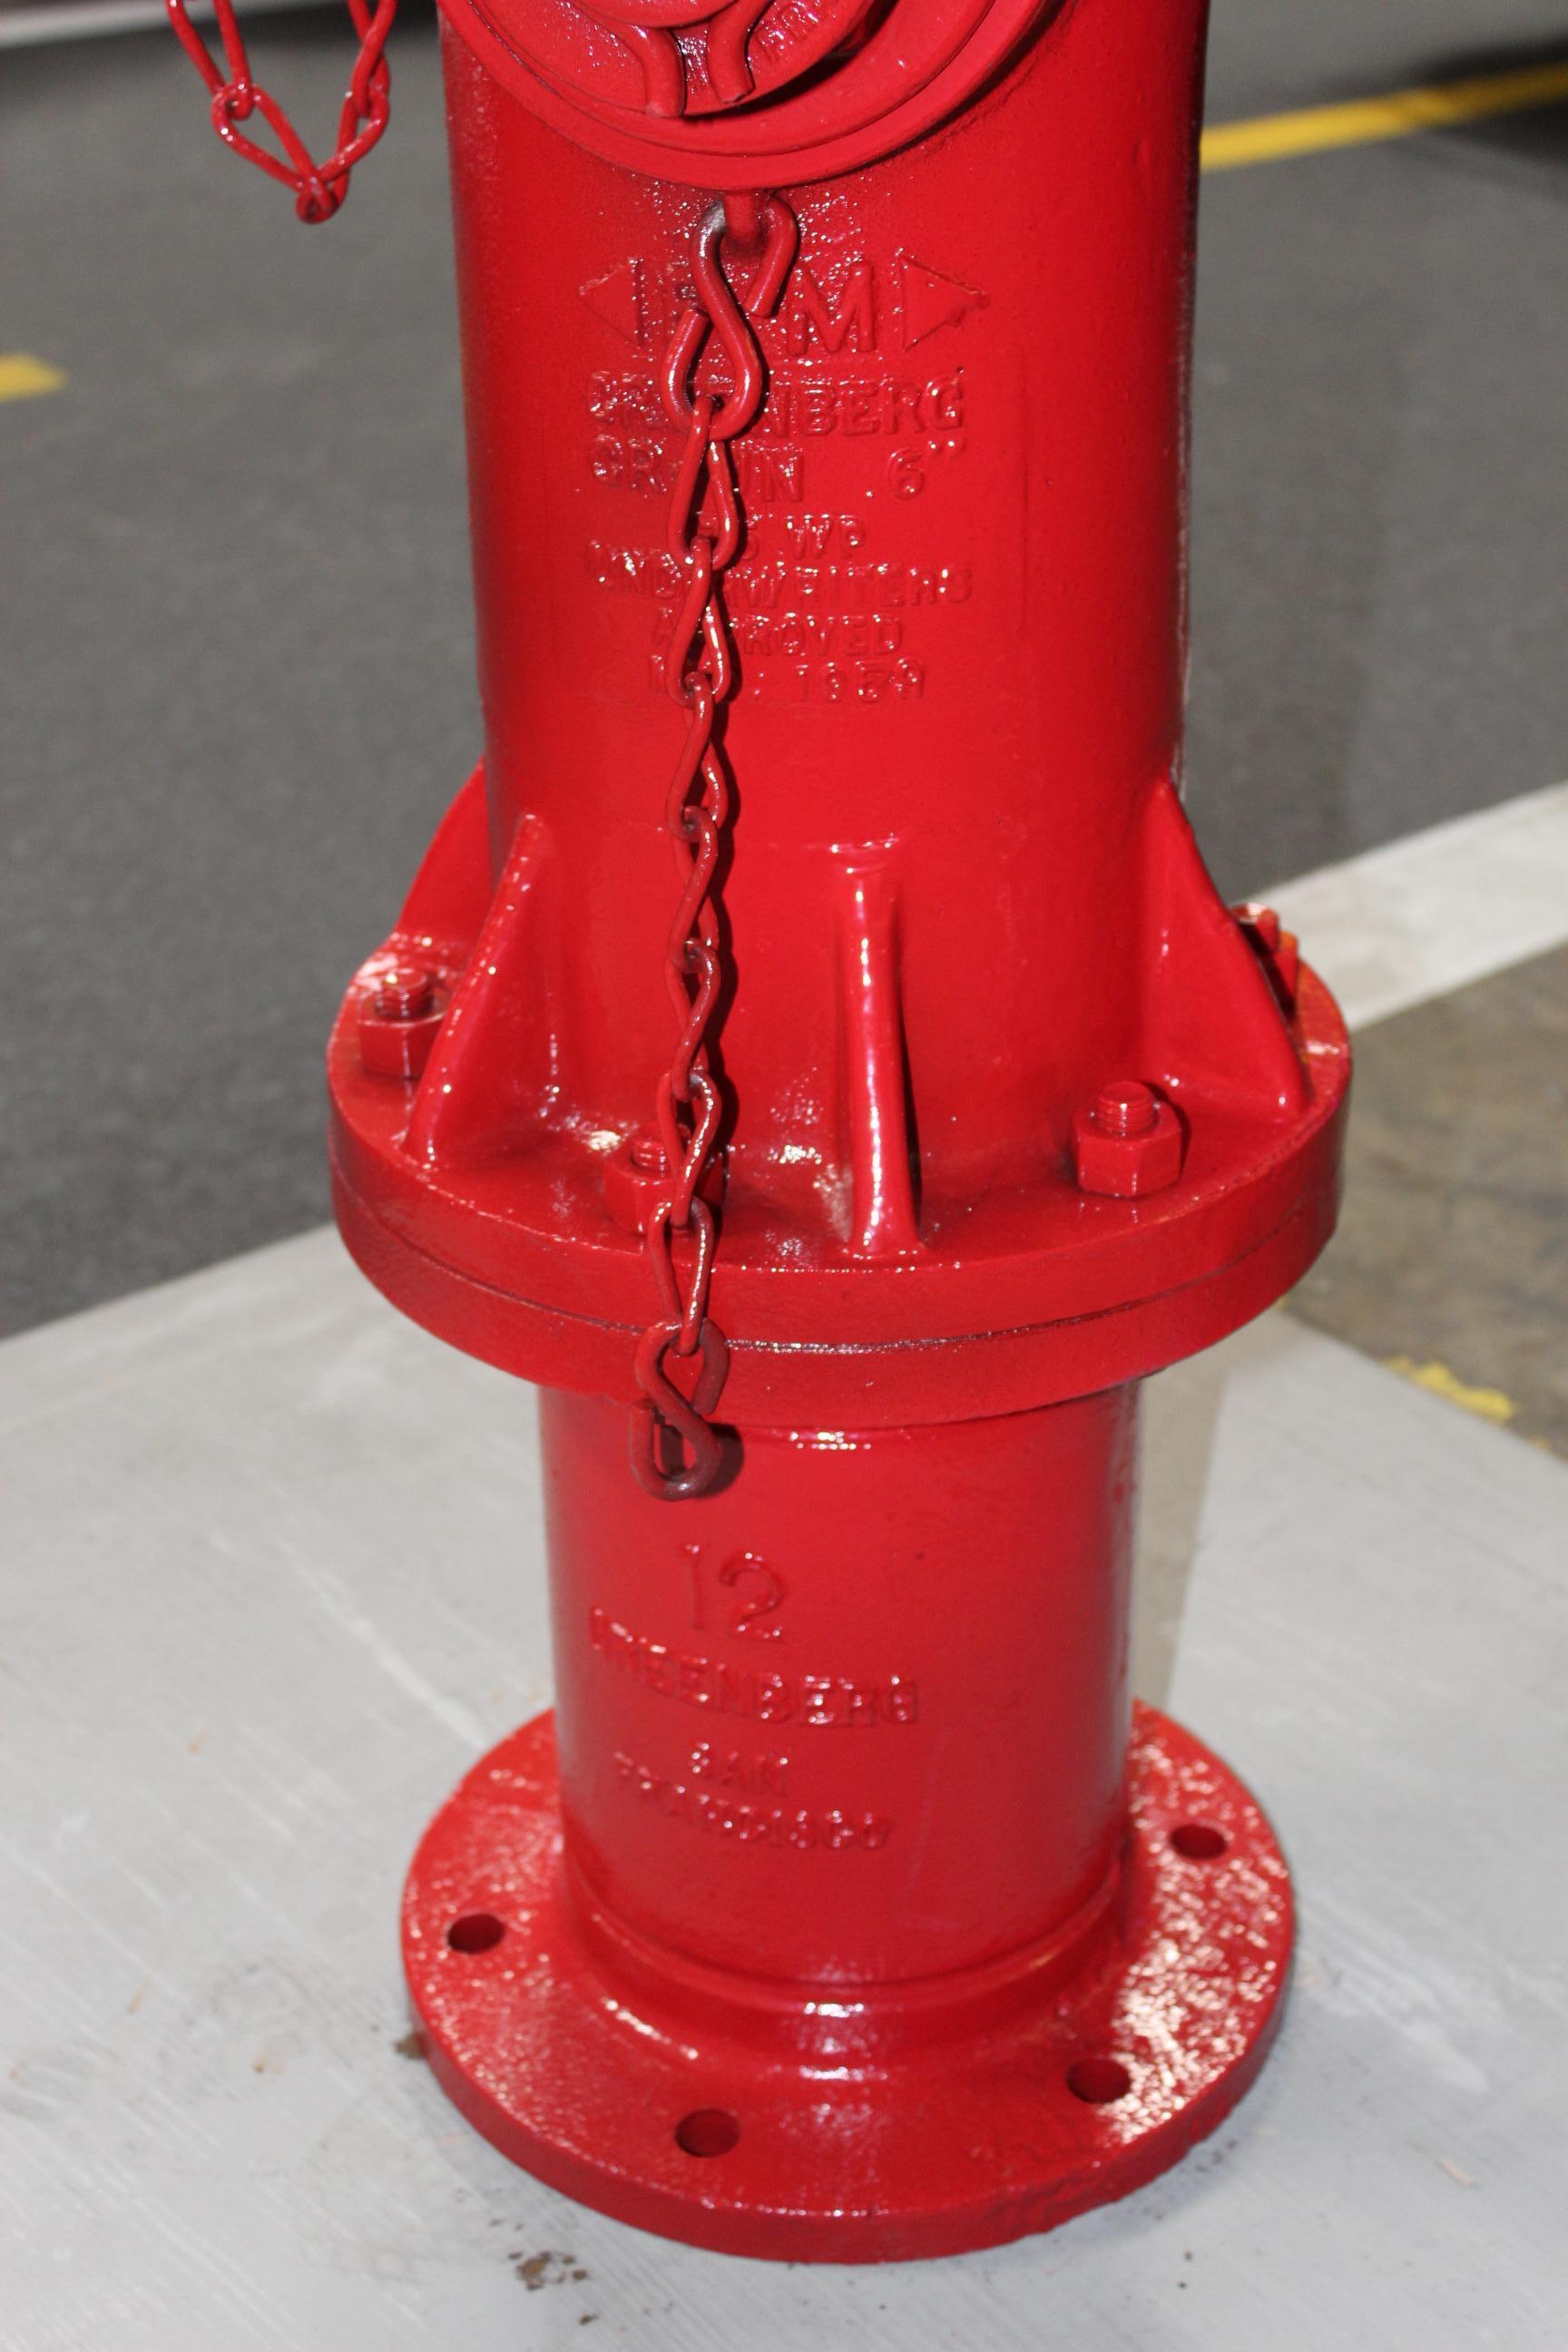 1959 M. Greenberg's Sons Fire Hydrant For Sale 4